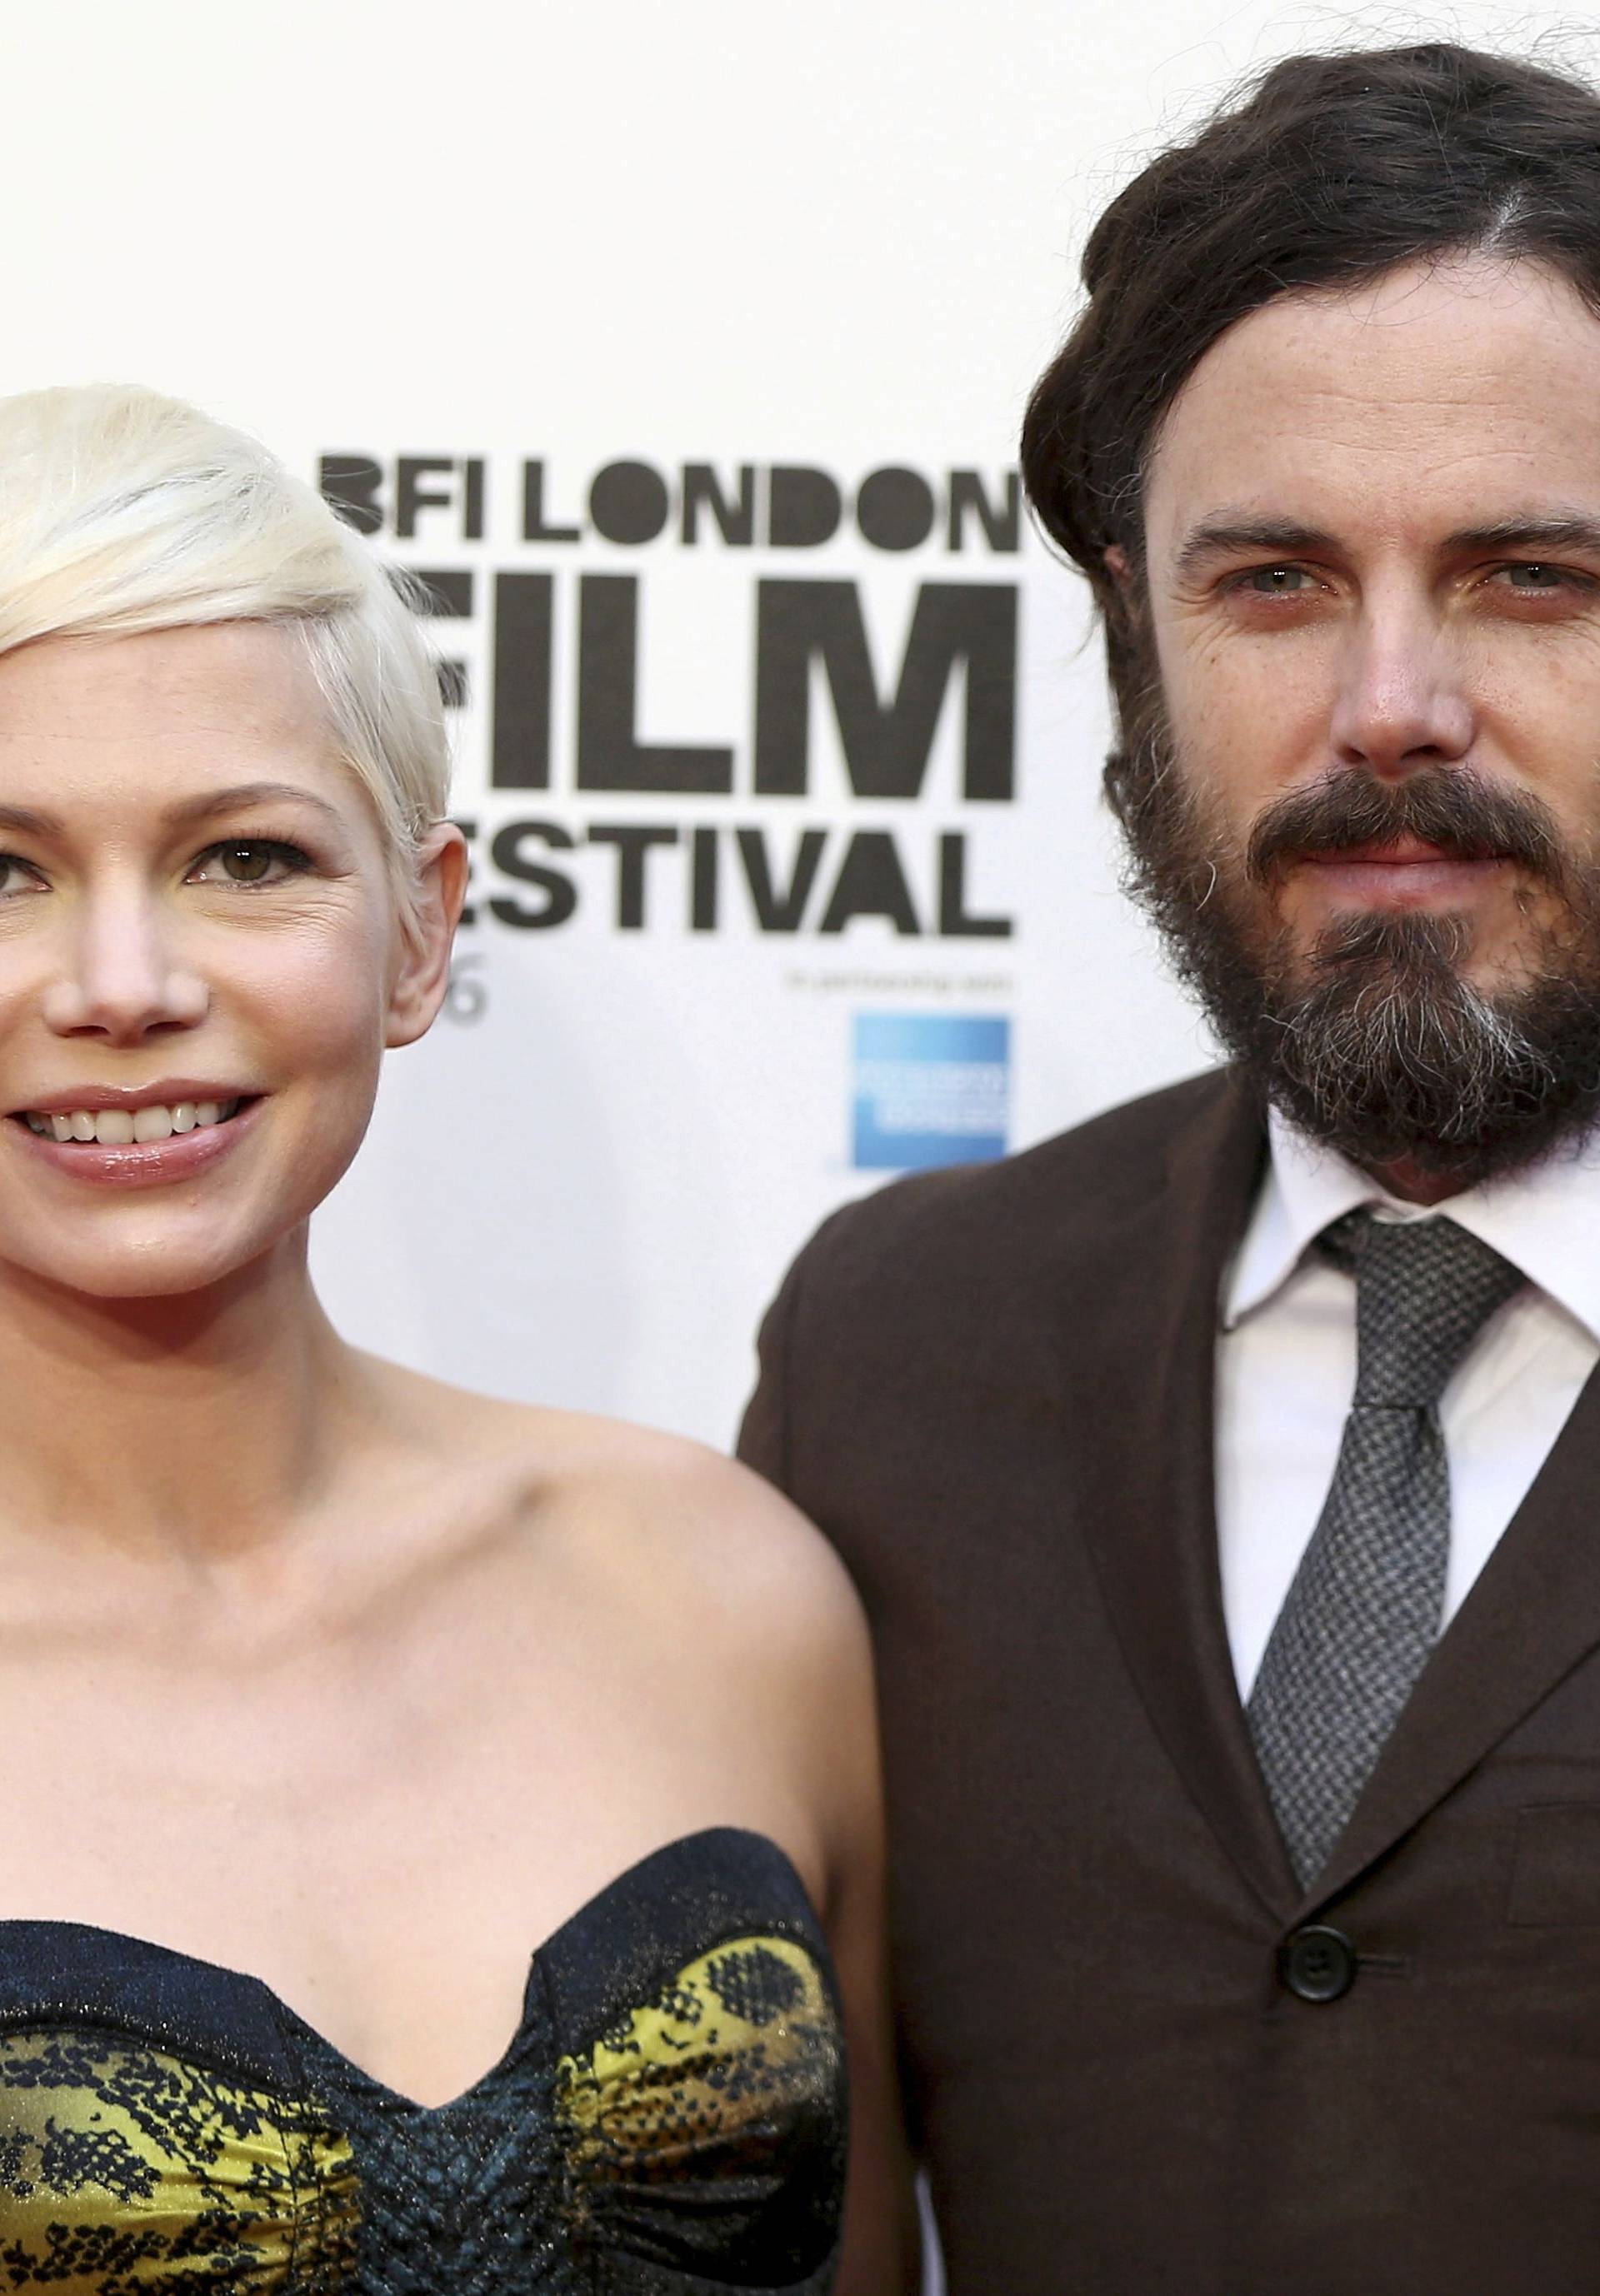 Actors Michelle Williams and Casey Affleck pose for photographers at a Gala screening of their film "Manchester by the Sea" at the 60th BFI London Film Festival in London